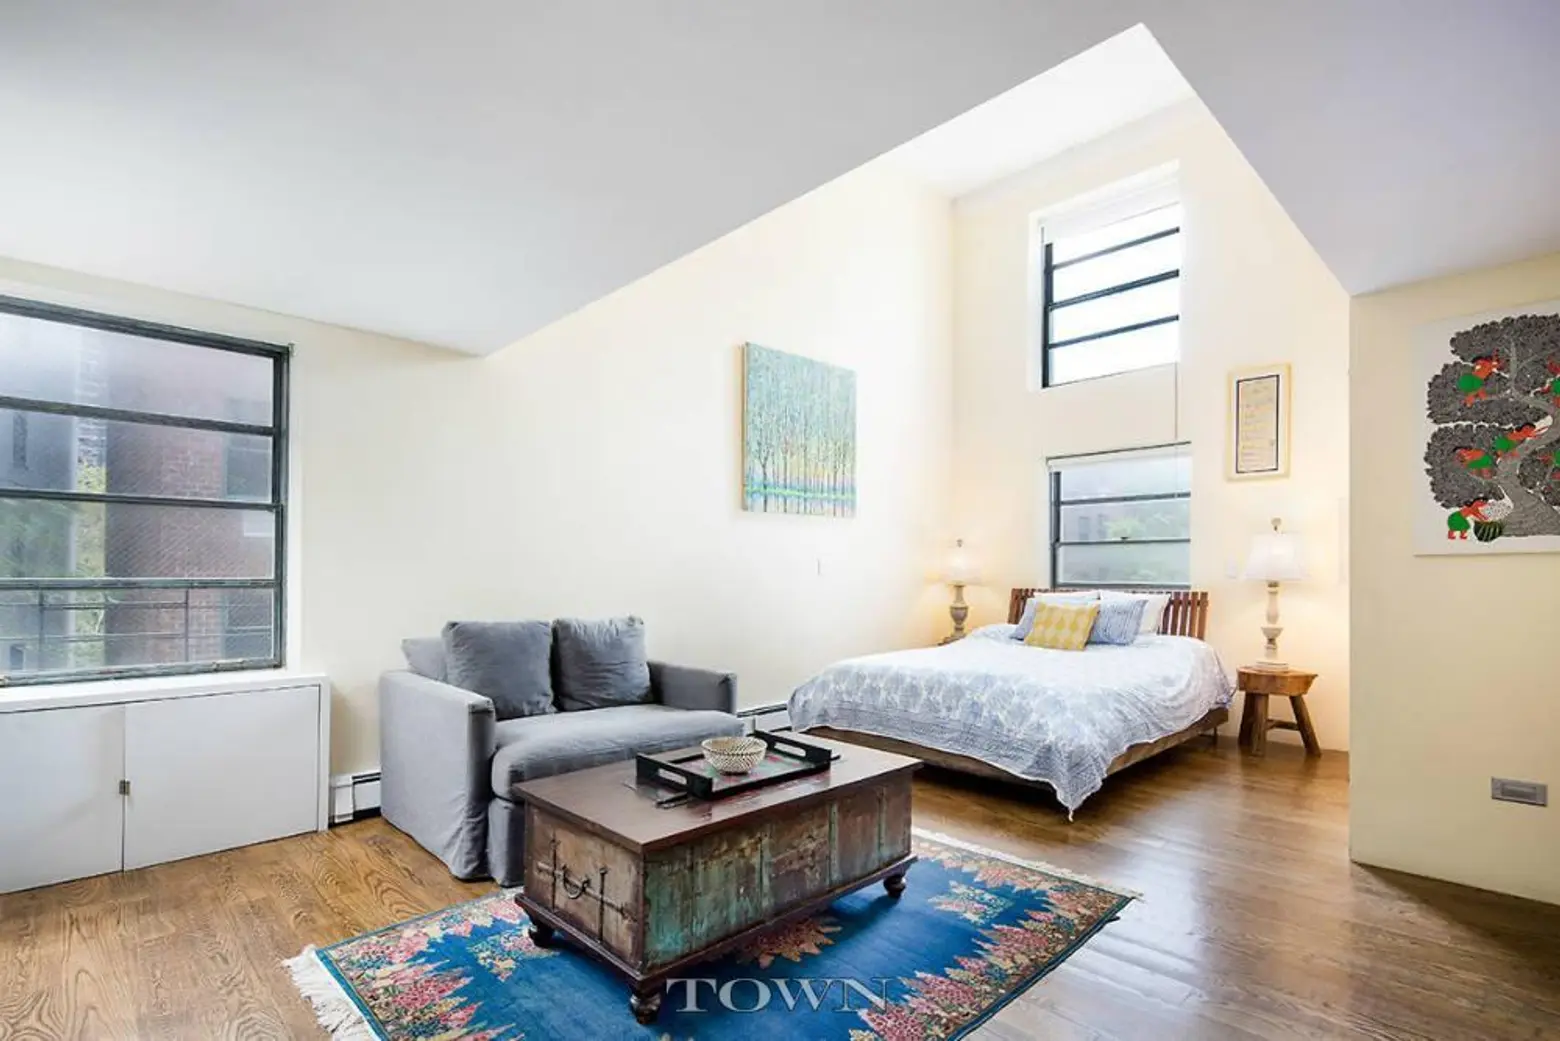 This $5.5M West Village Pad Has a Glass Catwalk and Will Make Your ...